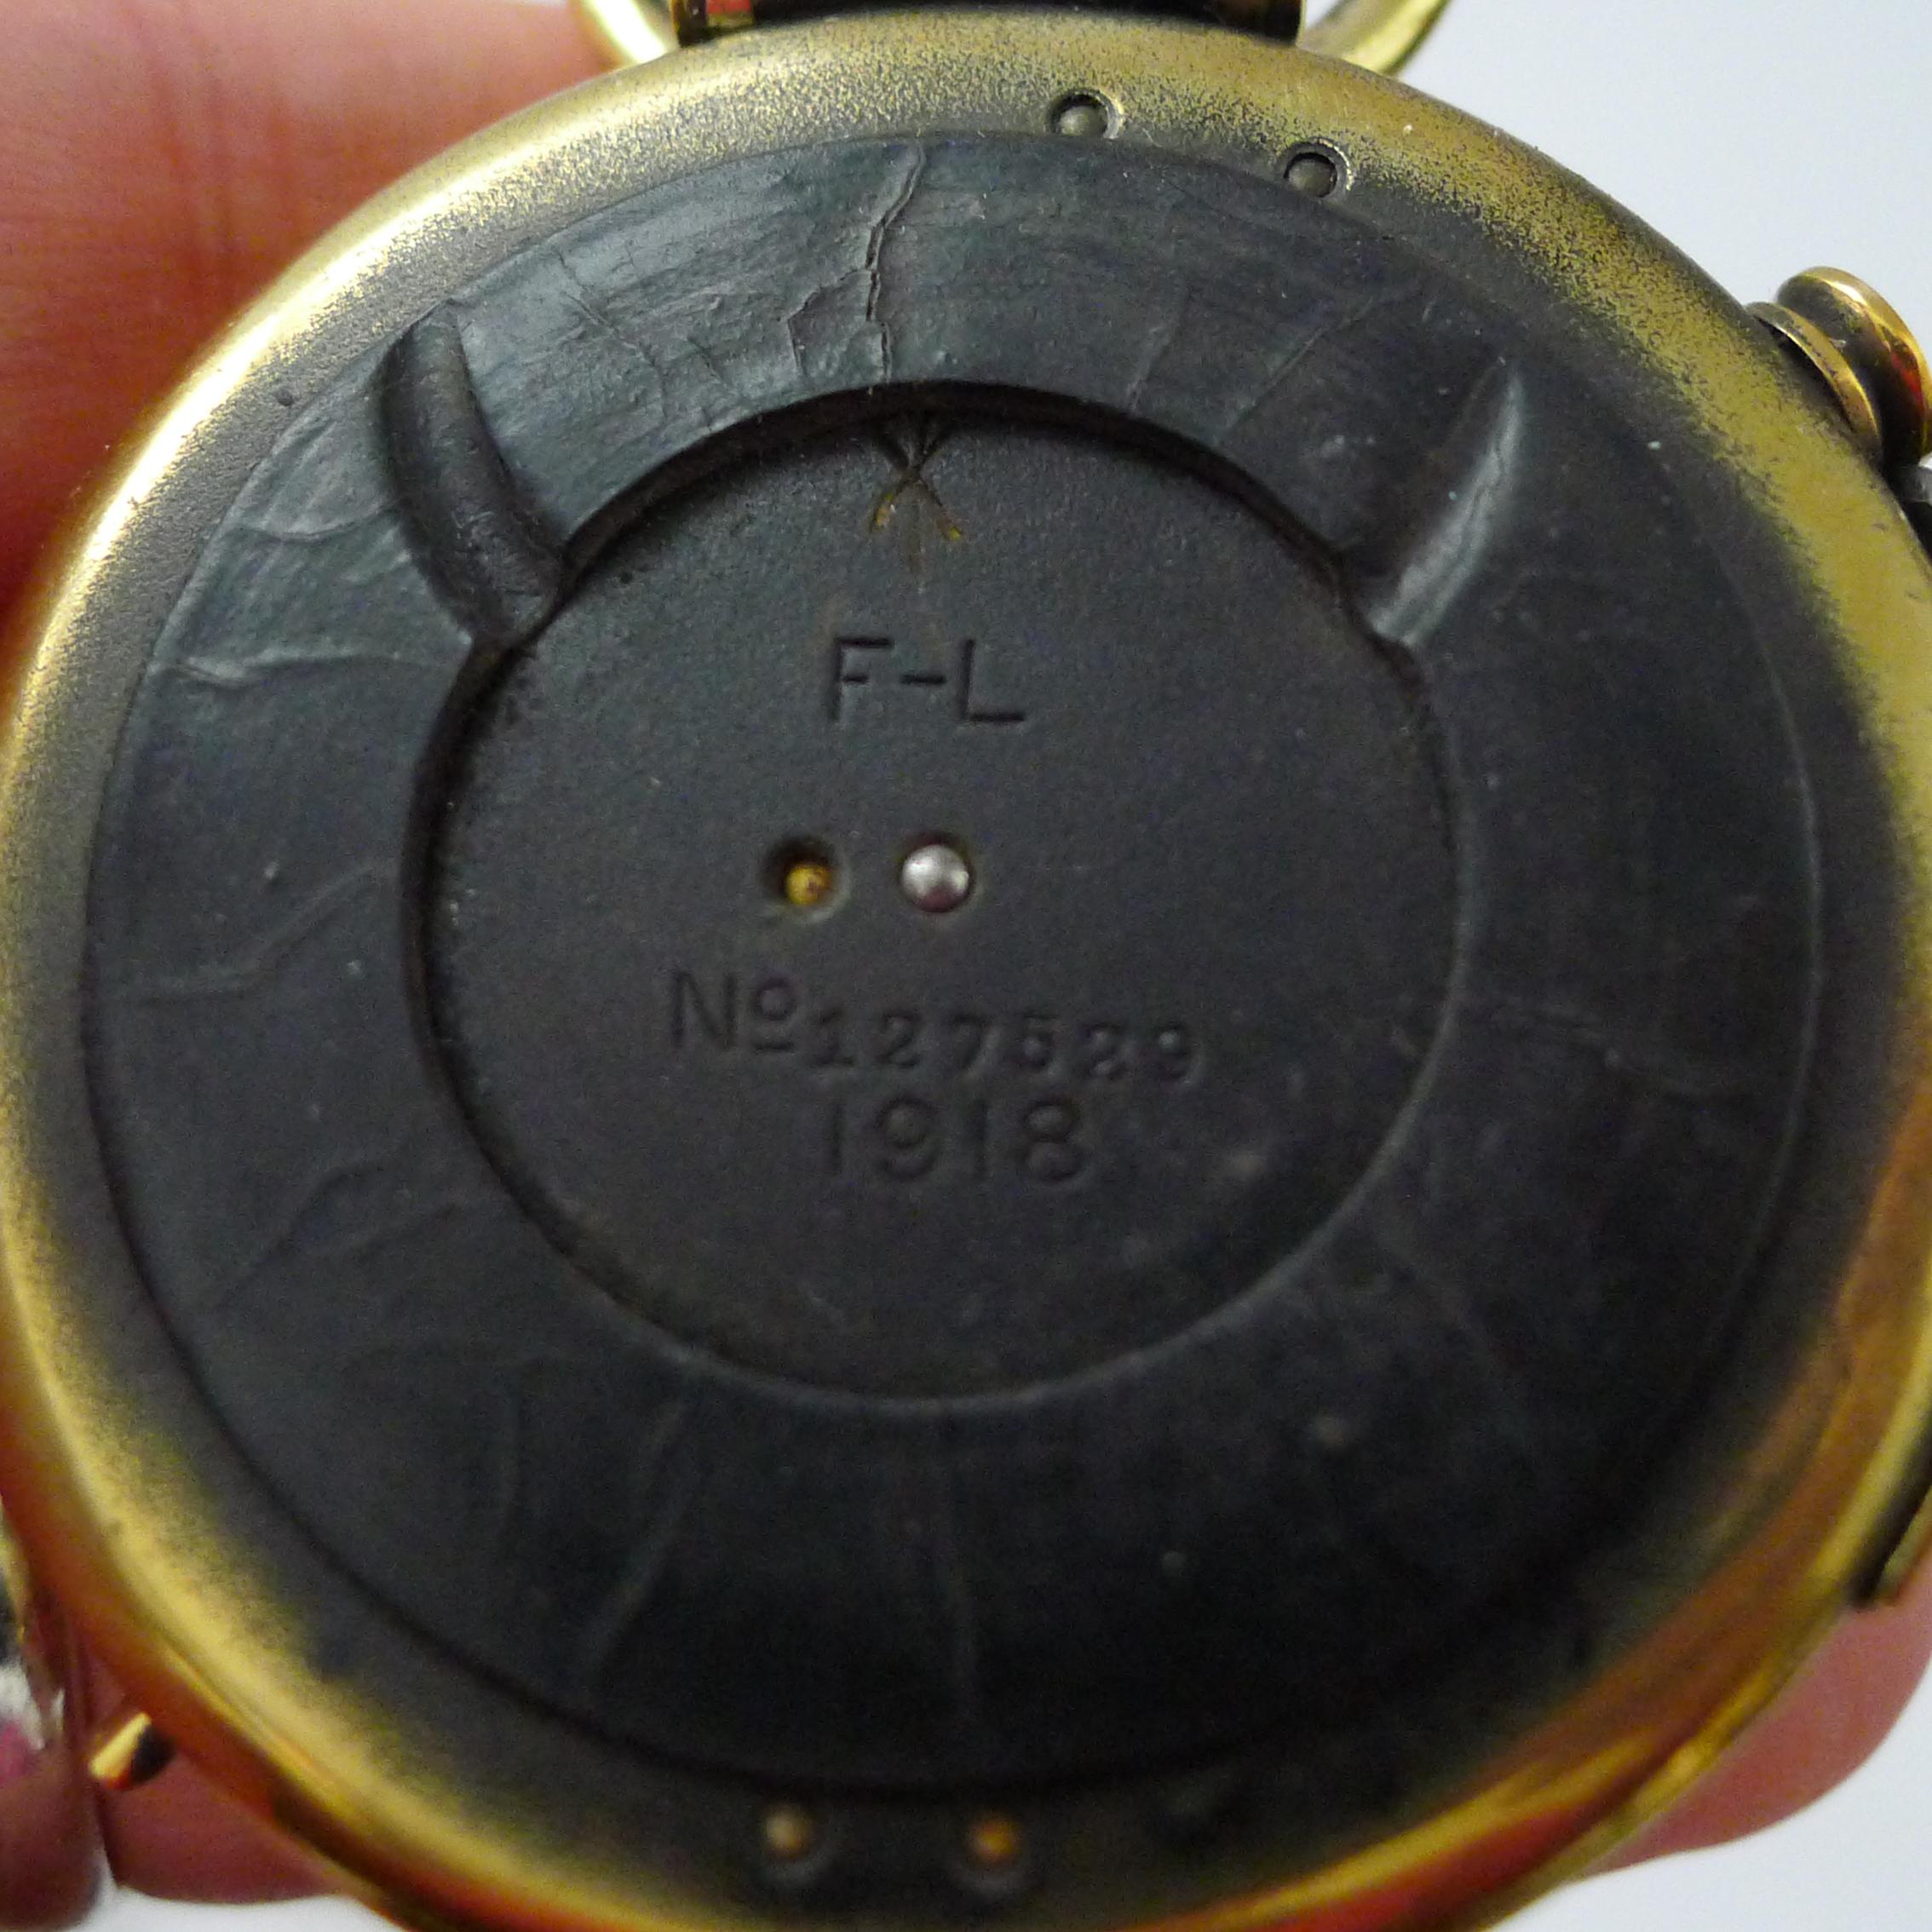 Early 20th Century WW1 1918 British Army Officer's Compass - Verner's Patent MK VII by French Ltd. For Sale